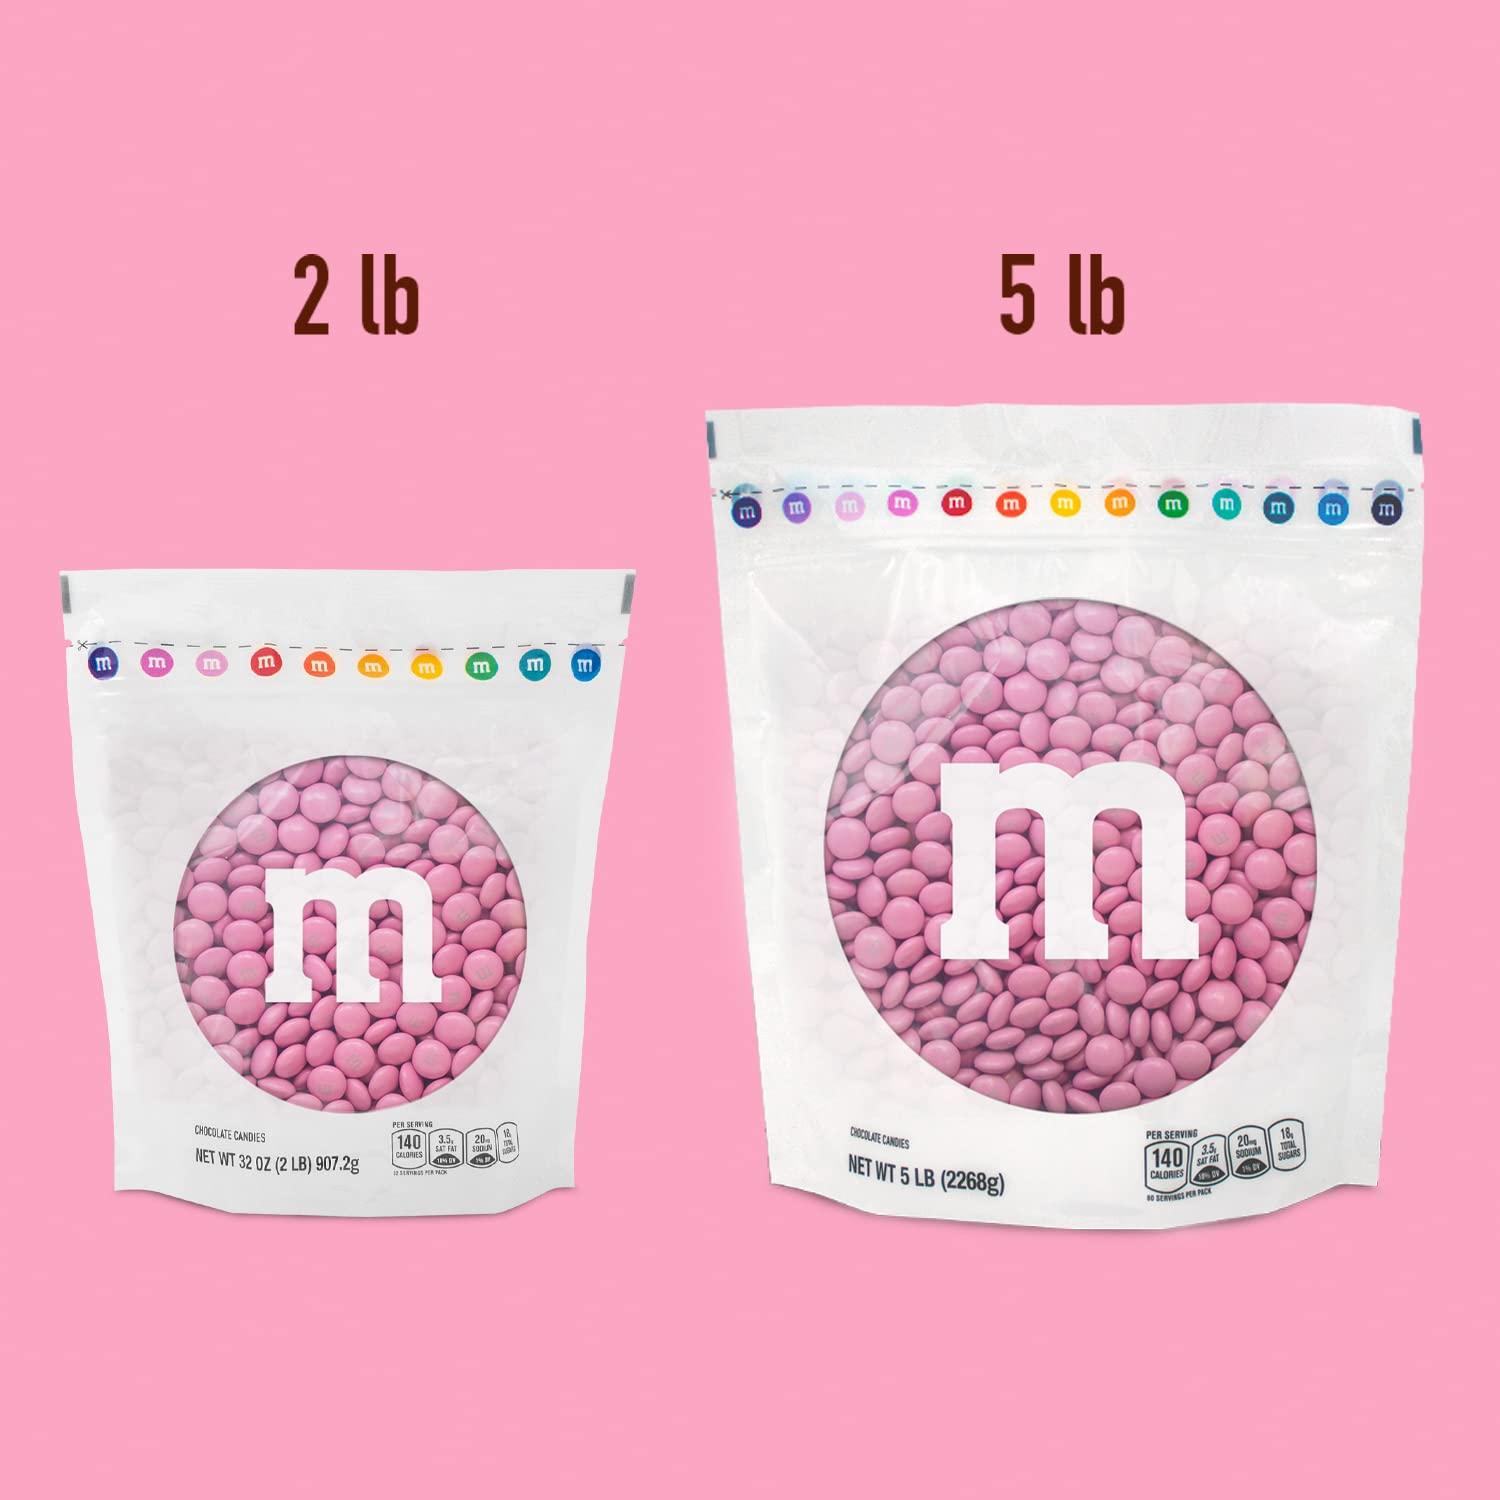  M&M'S Milk Chocolate Gender Reveal Candy Favors (20